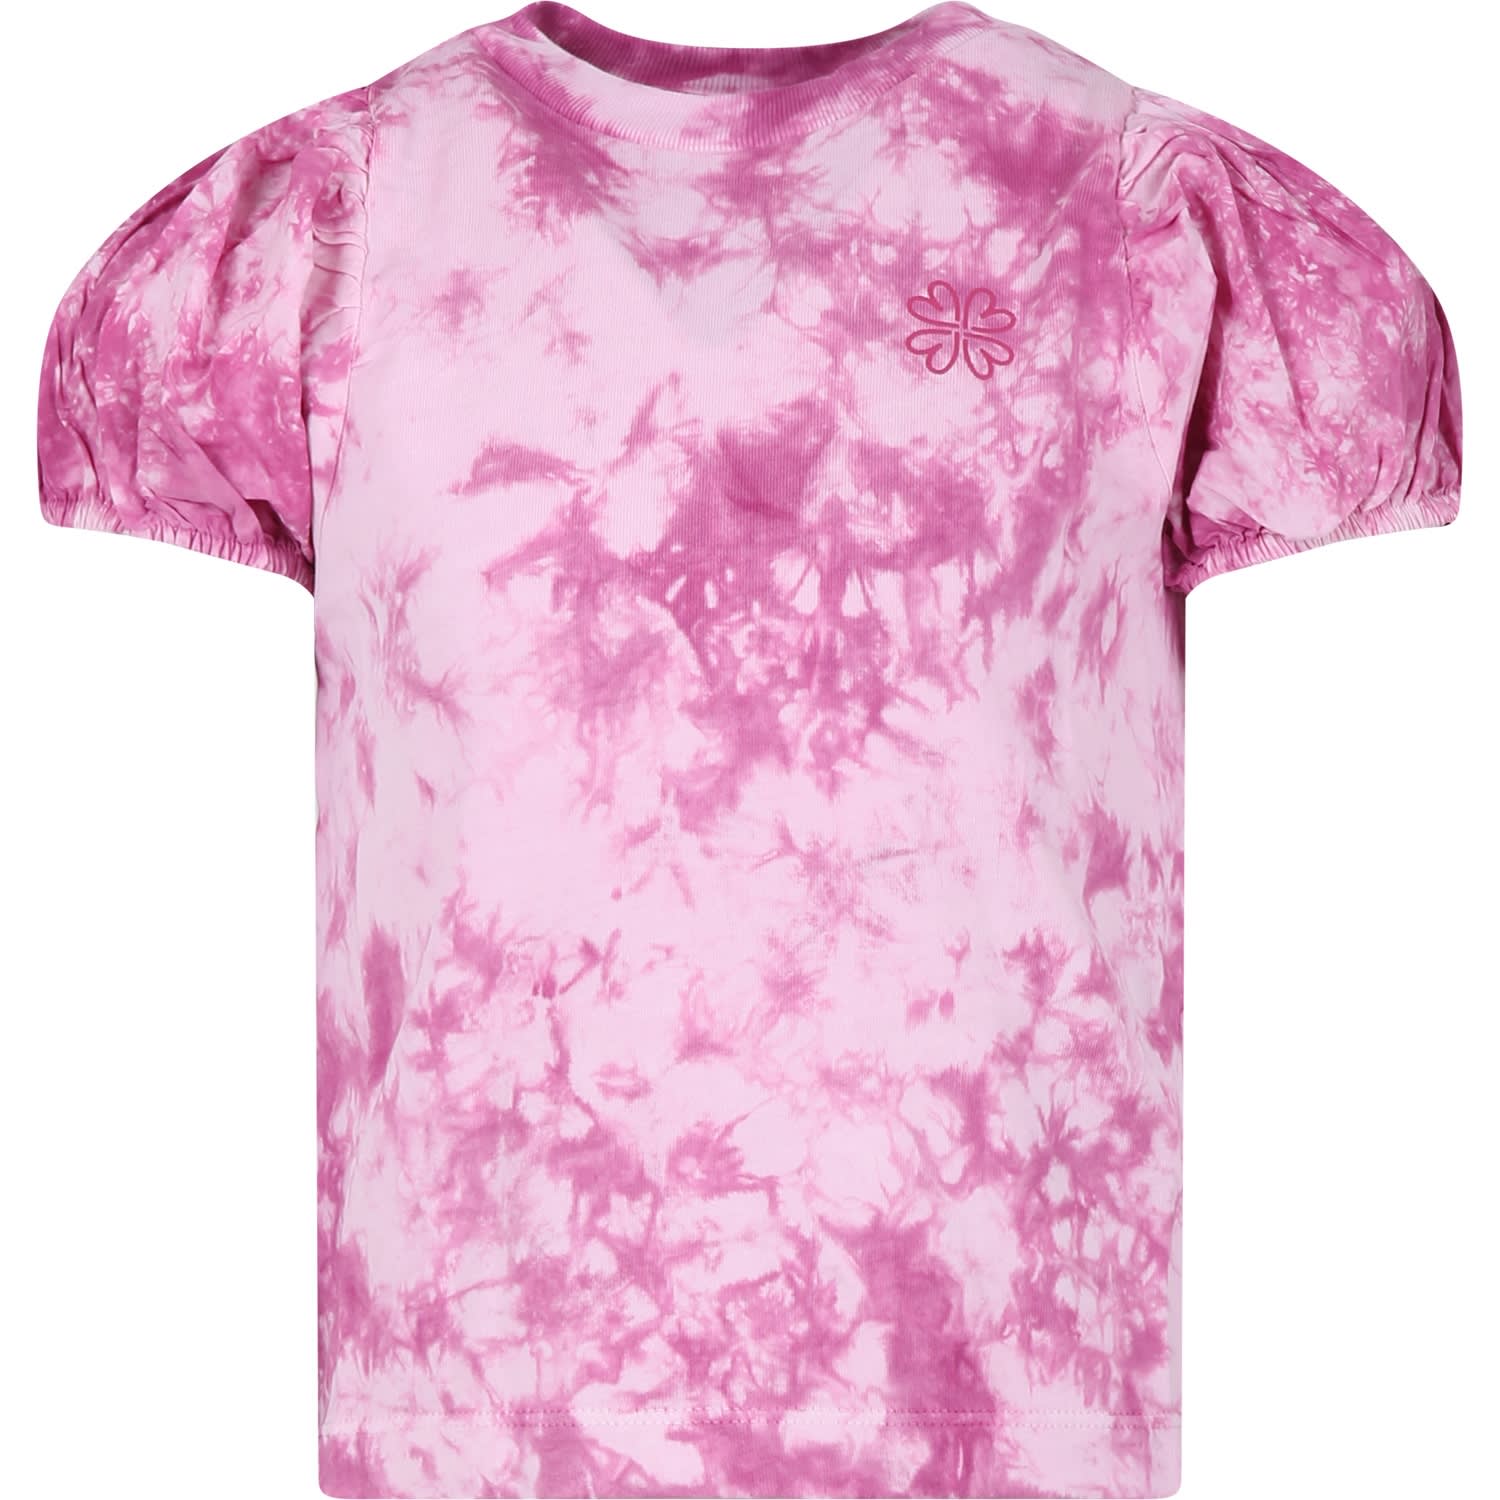 Molo Kids' Pink T-shirt For Girl With Tie Dye